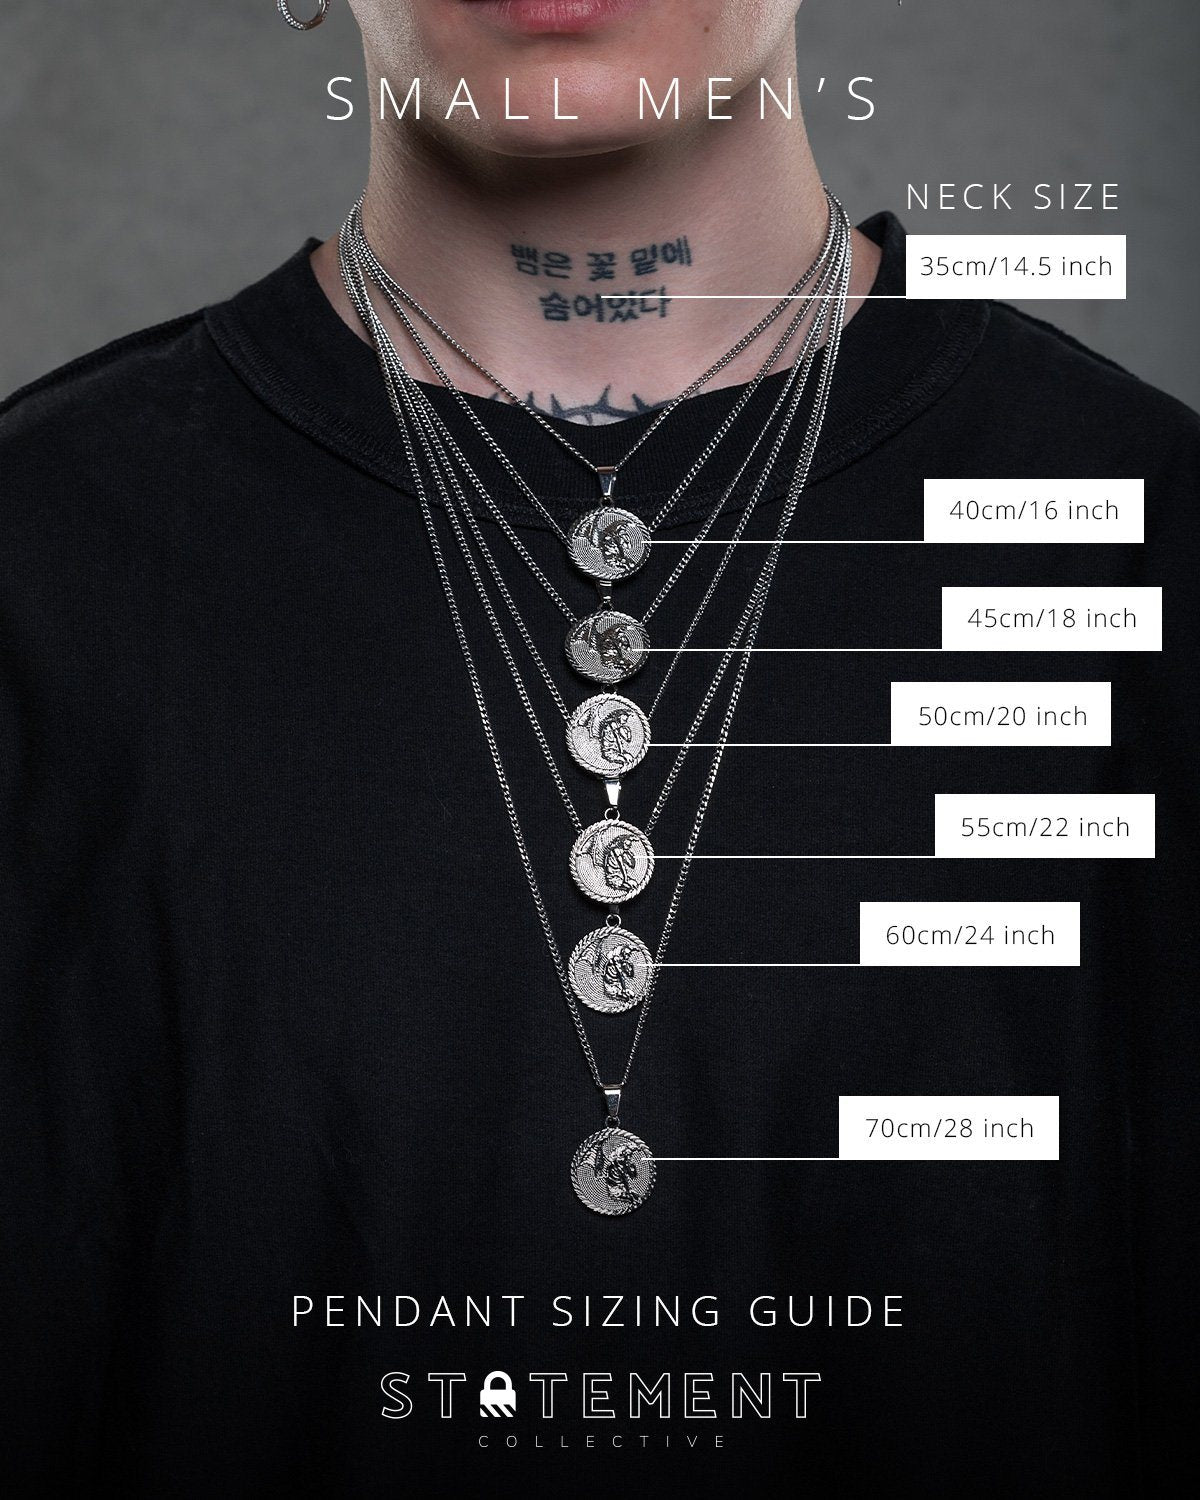 Mens small neck sizing model for butterfly dagger chain